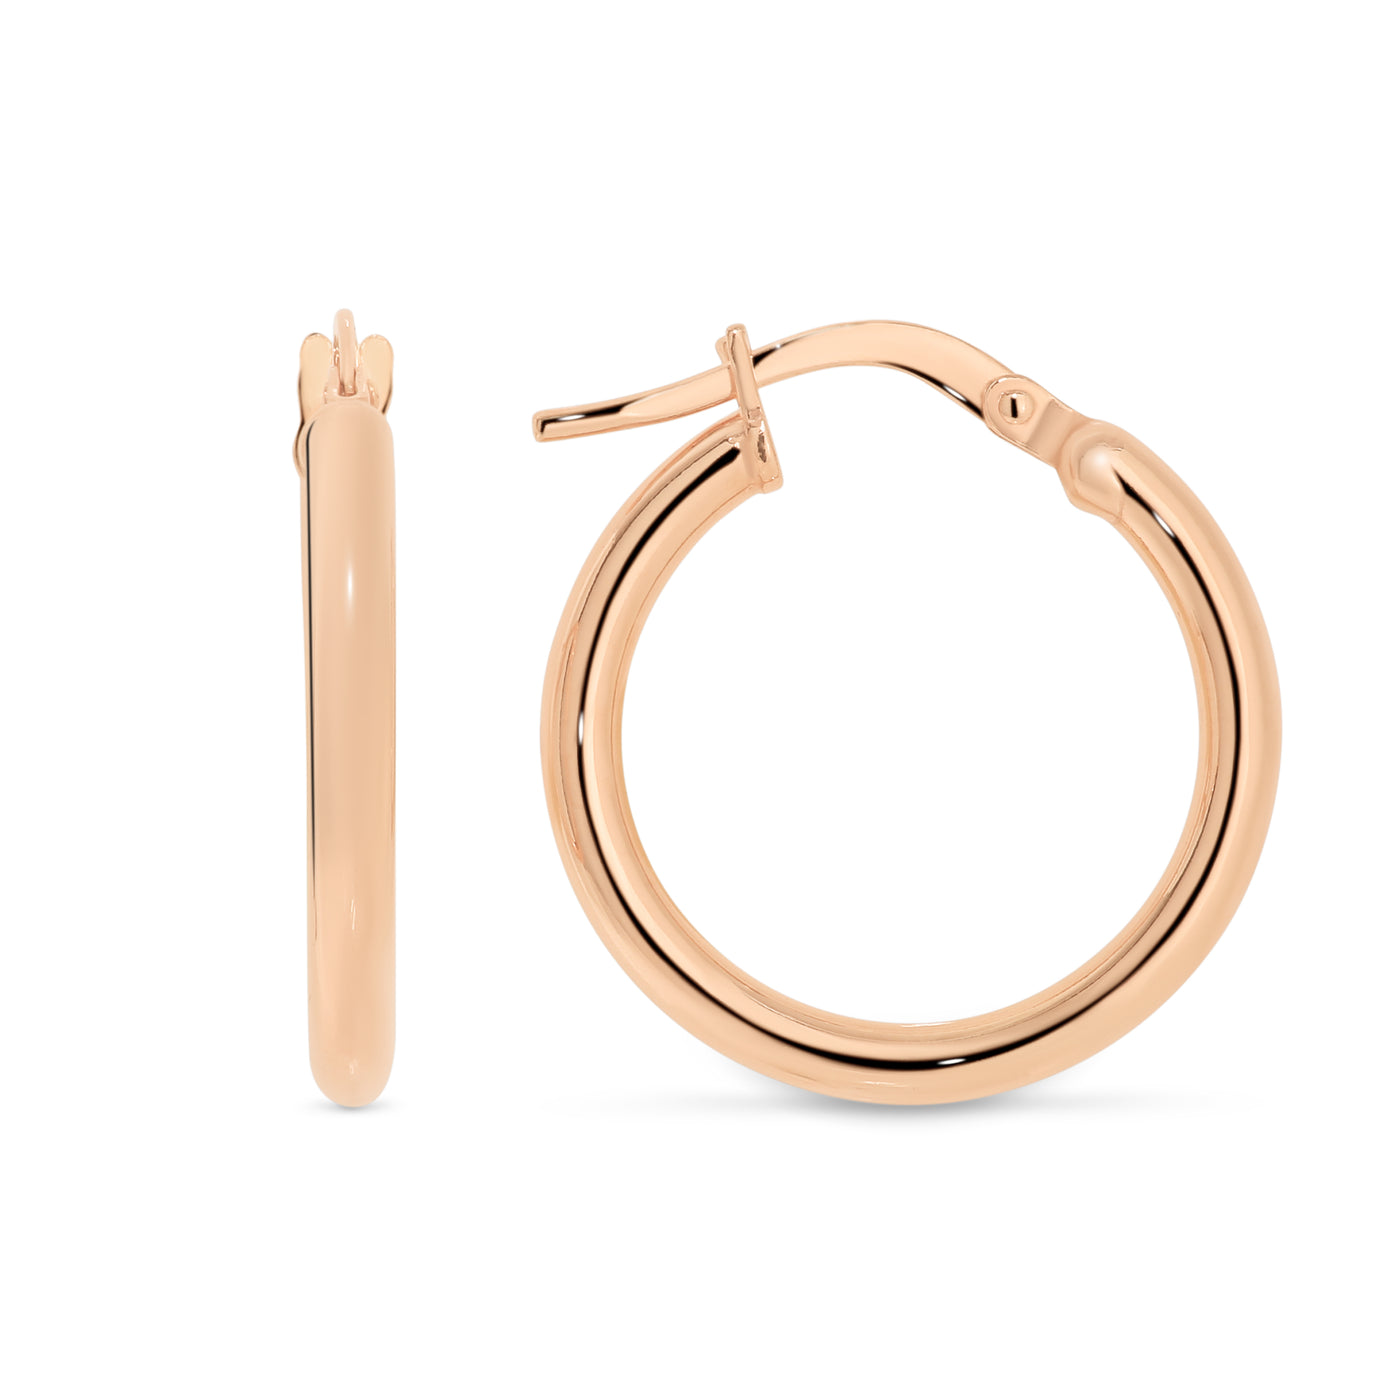 9k Rose Gold and Silver Bonded Earrings